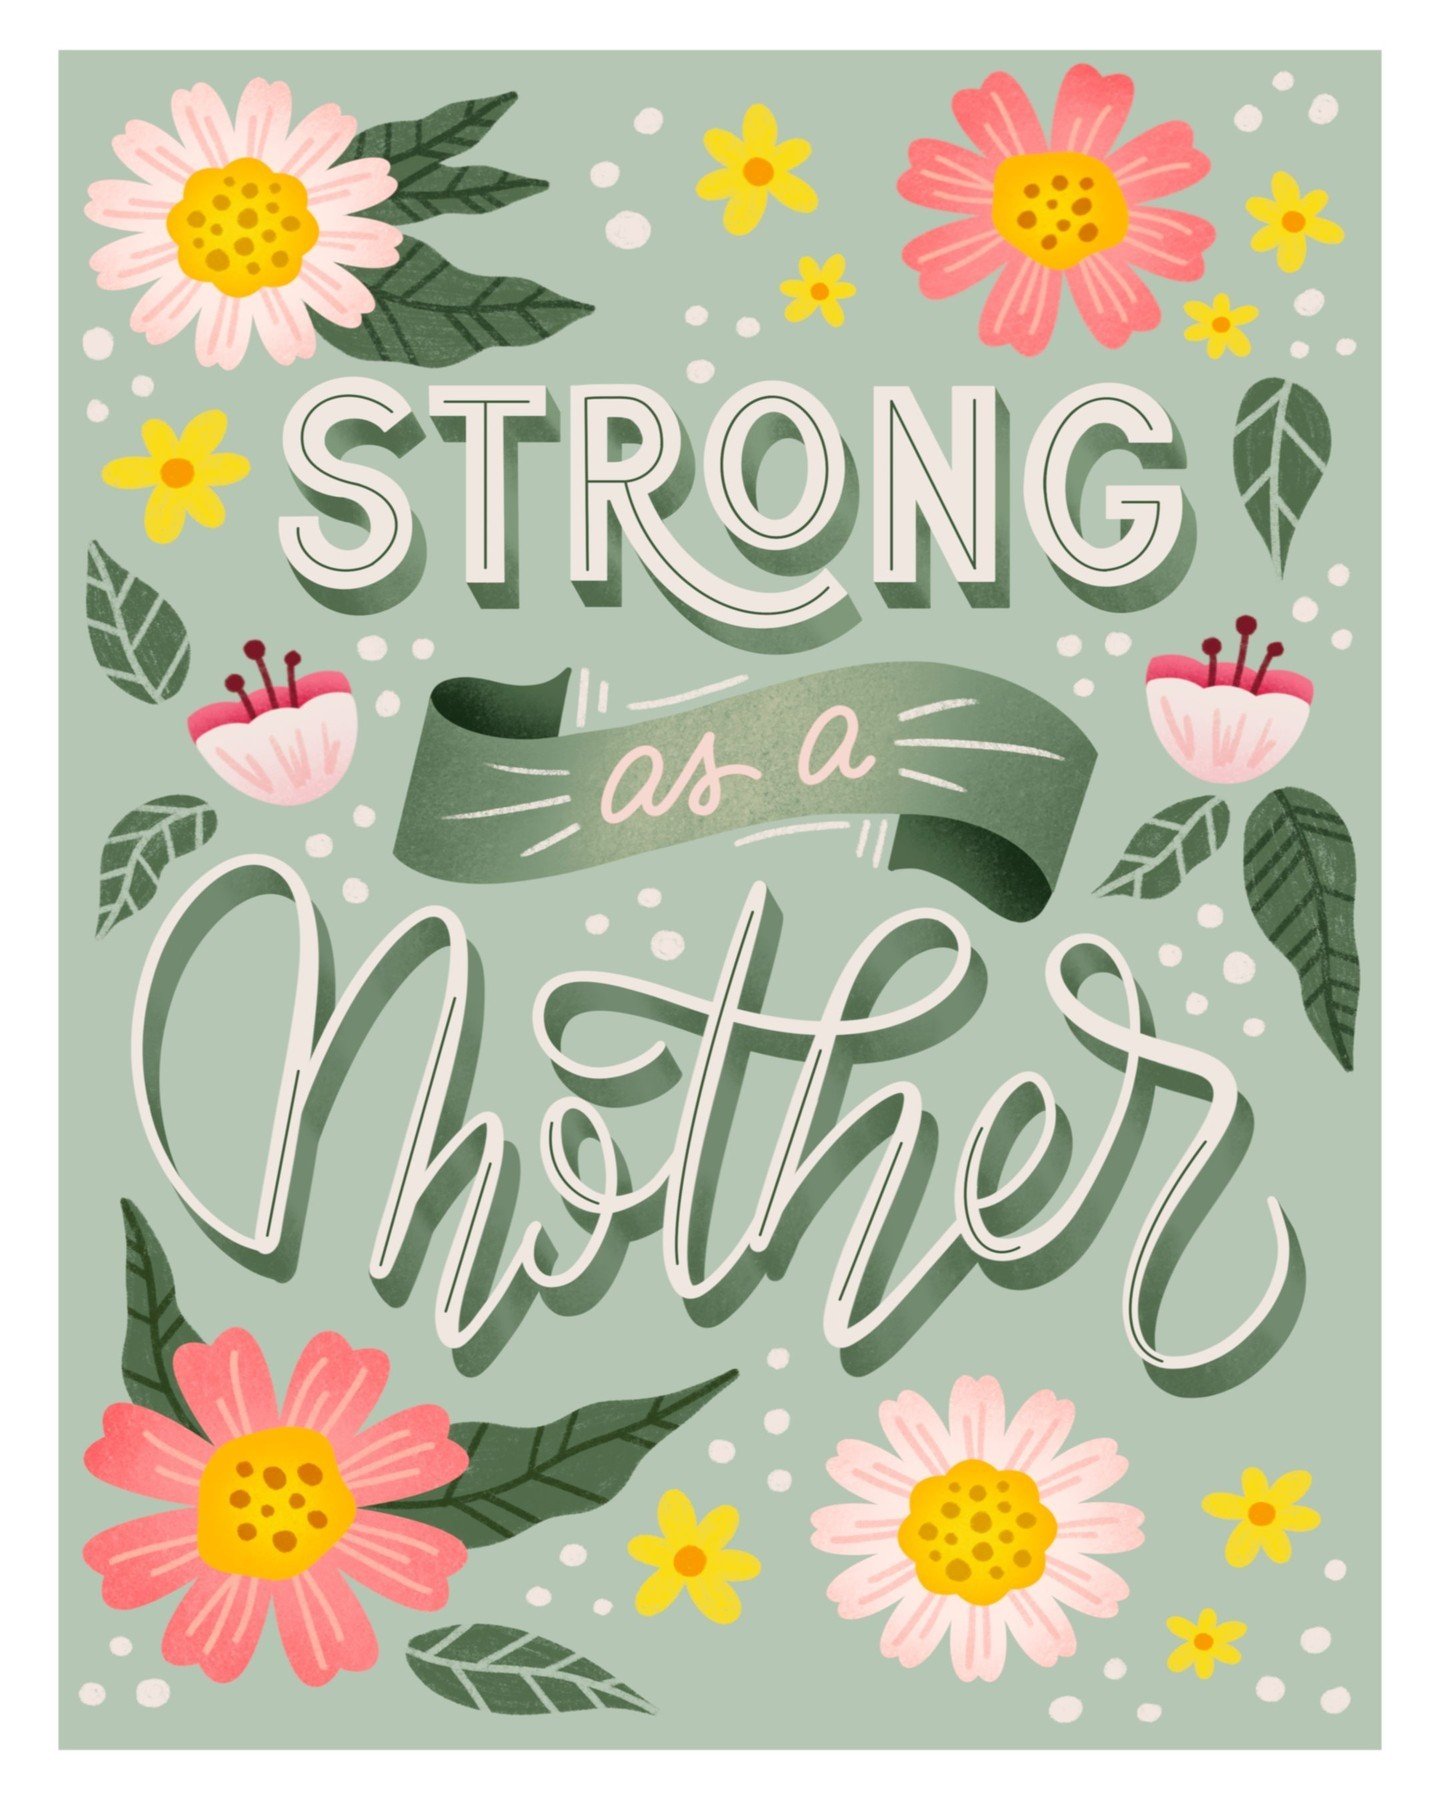 Strong as a mother! Celebrating the fierce love and unwavering strength of all moms this Mother&rsquo;s Day. Here&rsquo;s to the powerful women who shape our world! 💖

.
.
.

#mothersday #celebratingwomen #instalove #powerfulwomen #asamother #mom #c